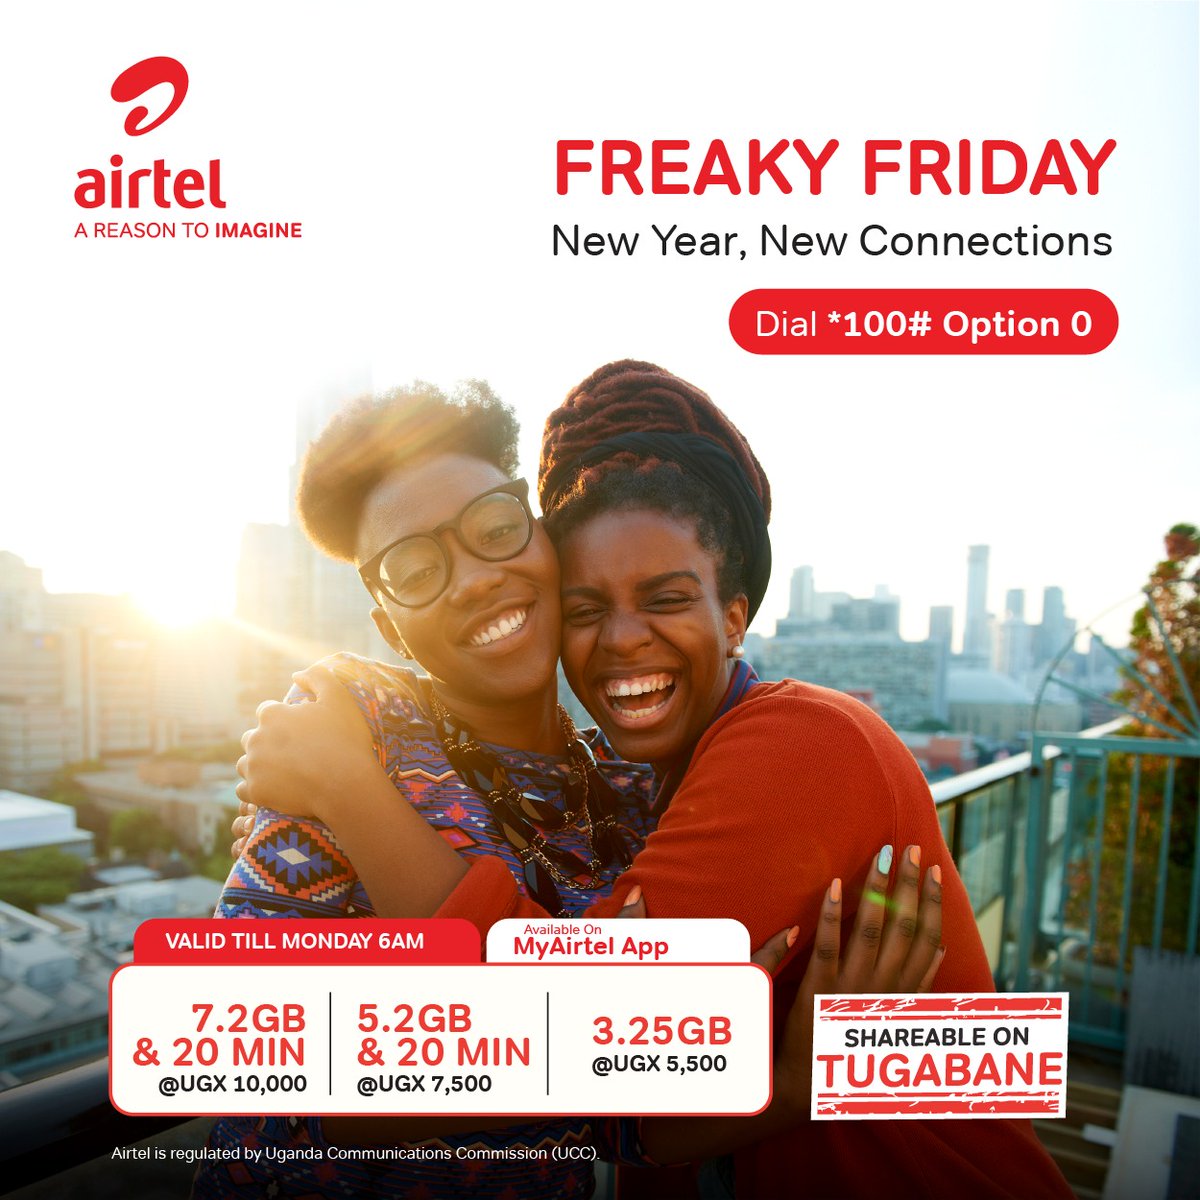 Rise and shine! It's the first Friday of the year, and we've got an unbeatable call time and data bundle. #FreakyFriday #AReasonToImagine